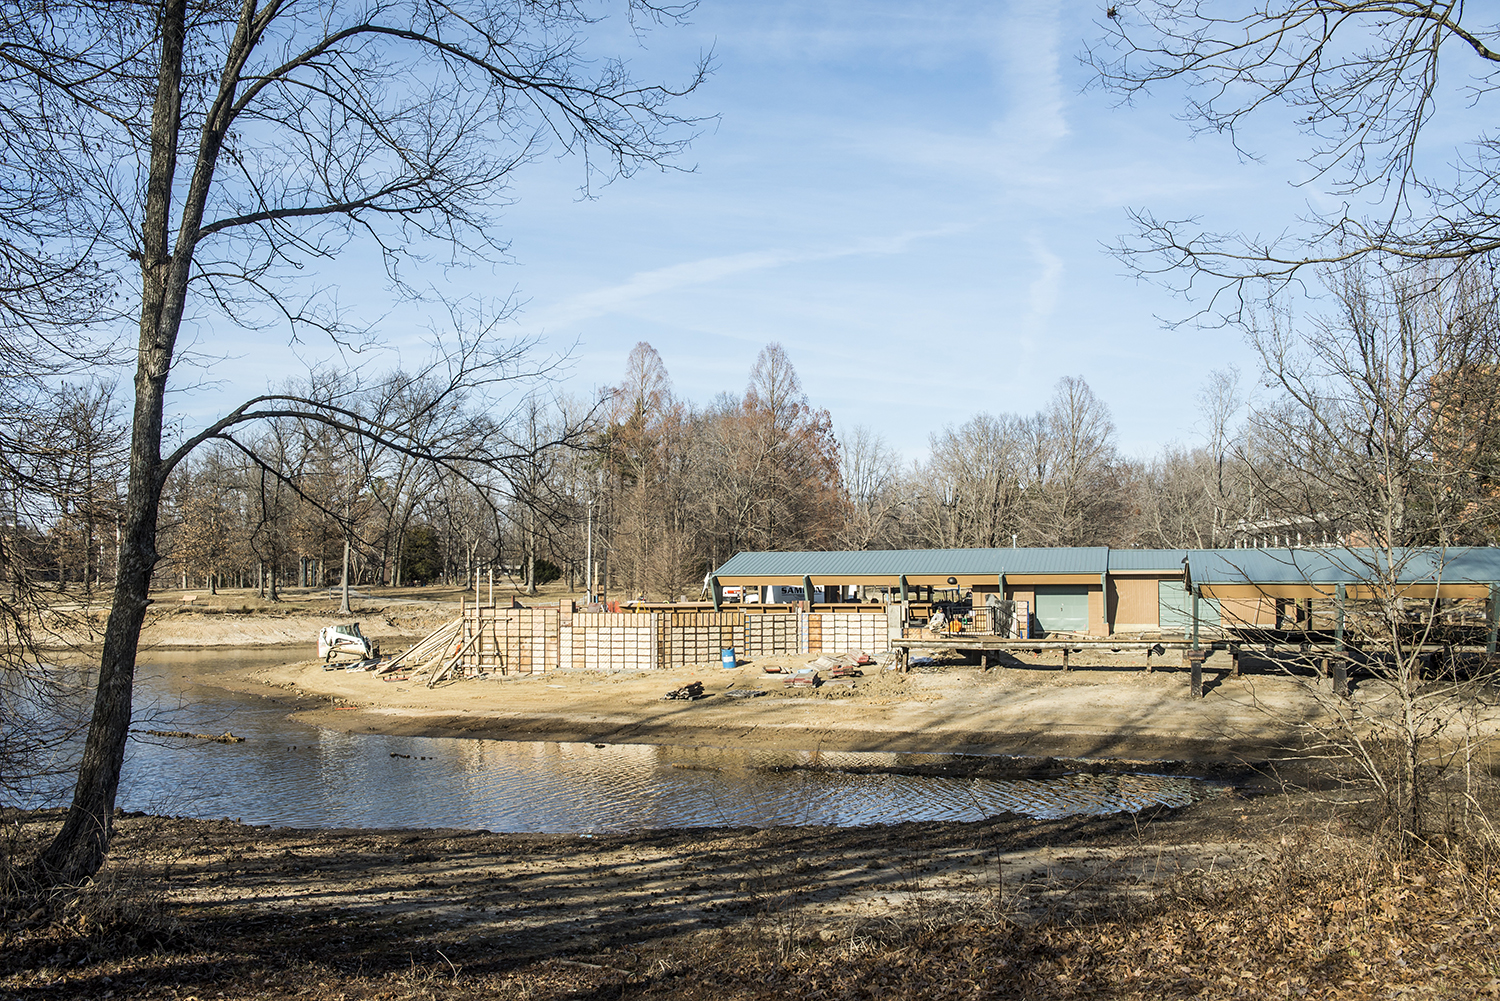 Ralph E. Becker Boat Dock And Pavilion Expected To Be Ready By Spring